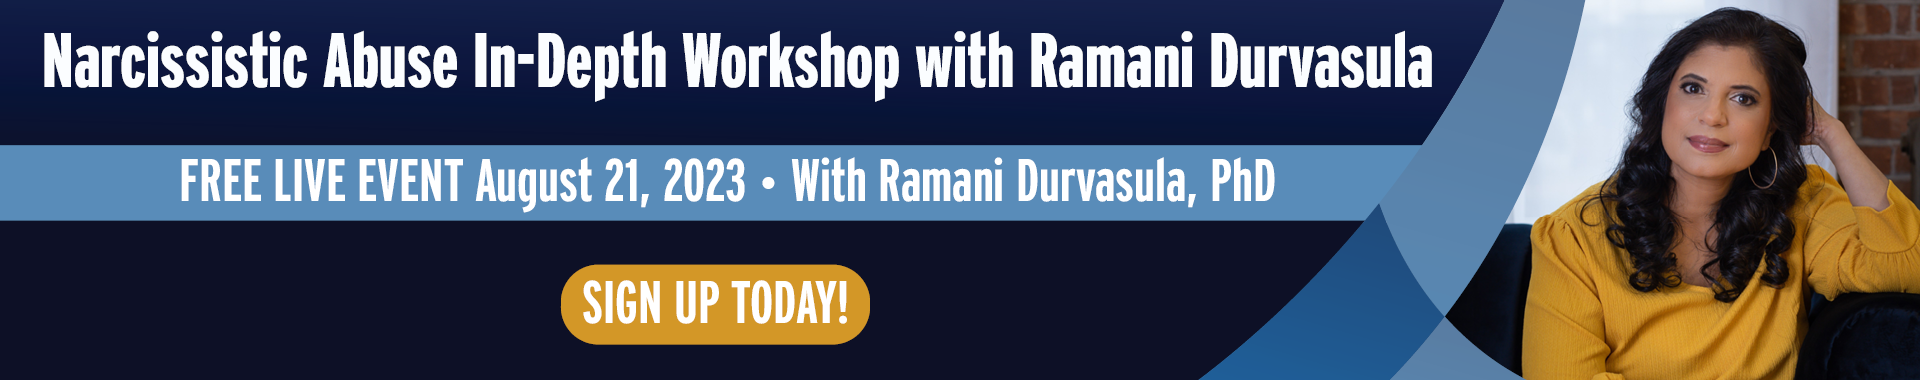 FREE Online Event! | Narcissistic Abuse In-Depth Workshop with Ramani Durvasula